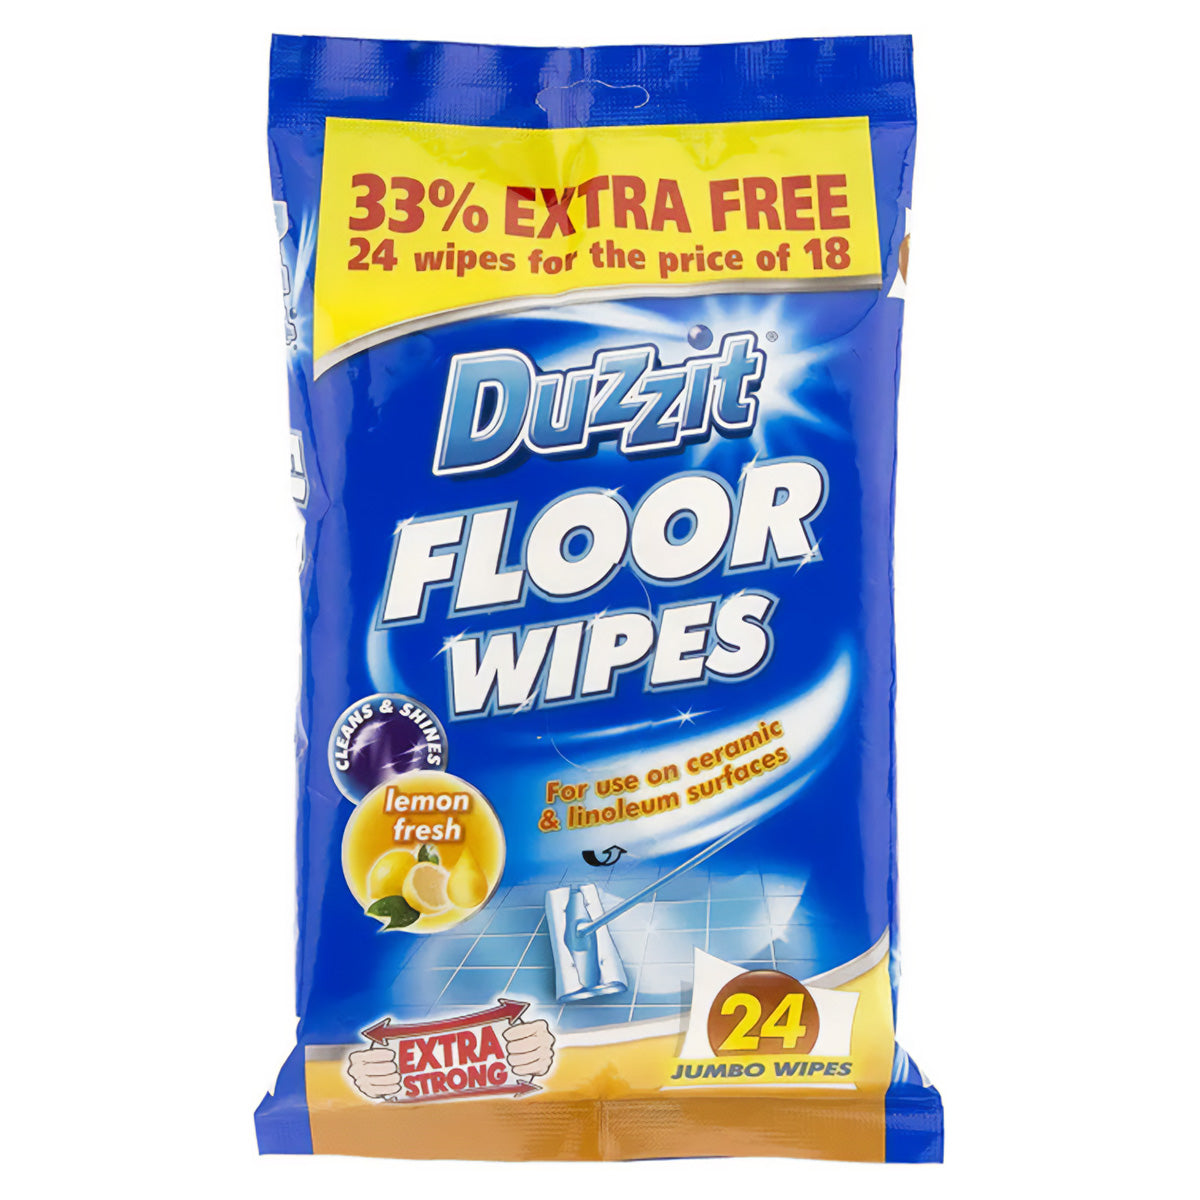 Duzzit - Floor Wipes - 24 Wipes in a bag.